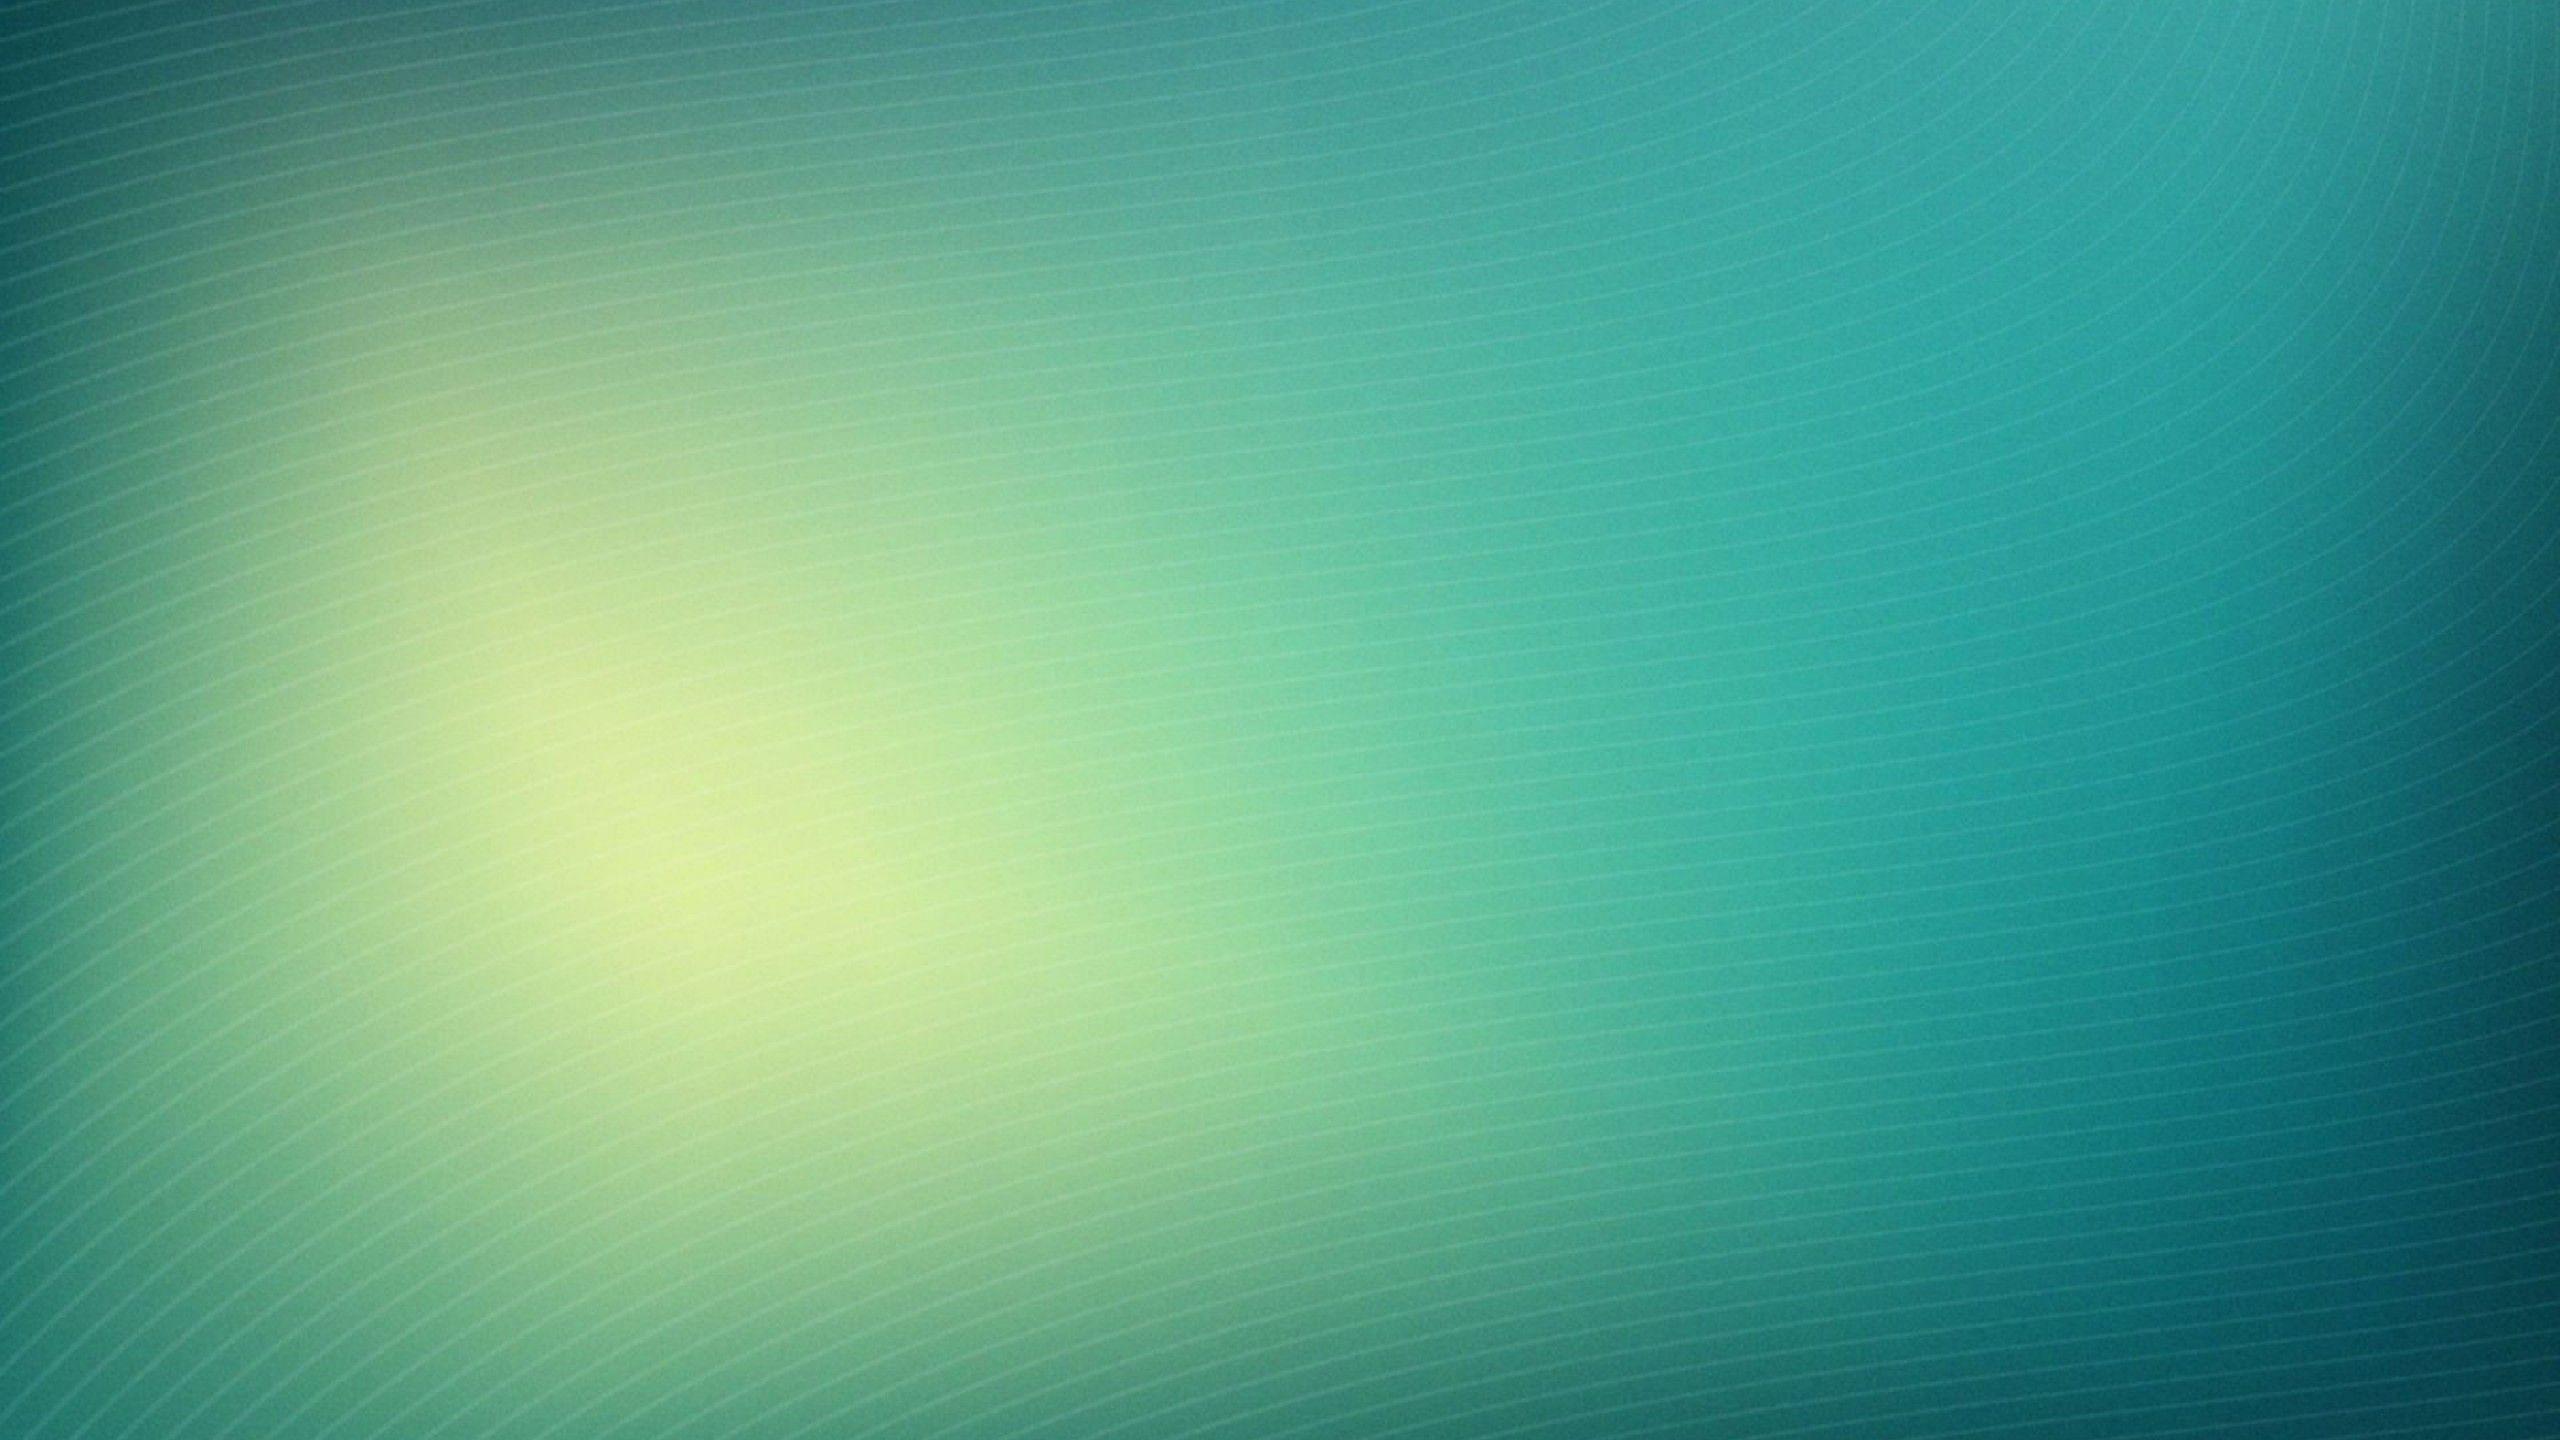 Calm Backgrounds Image